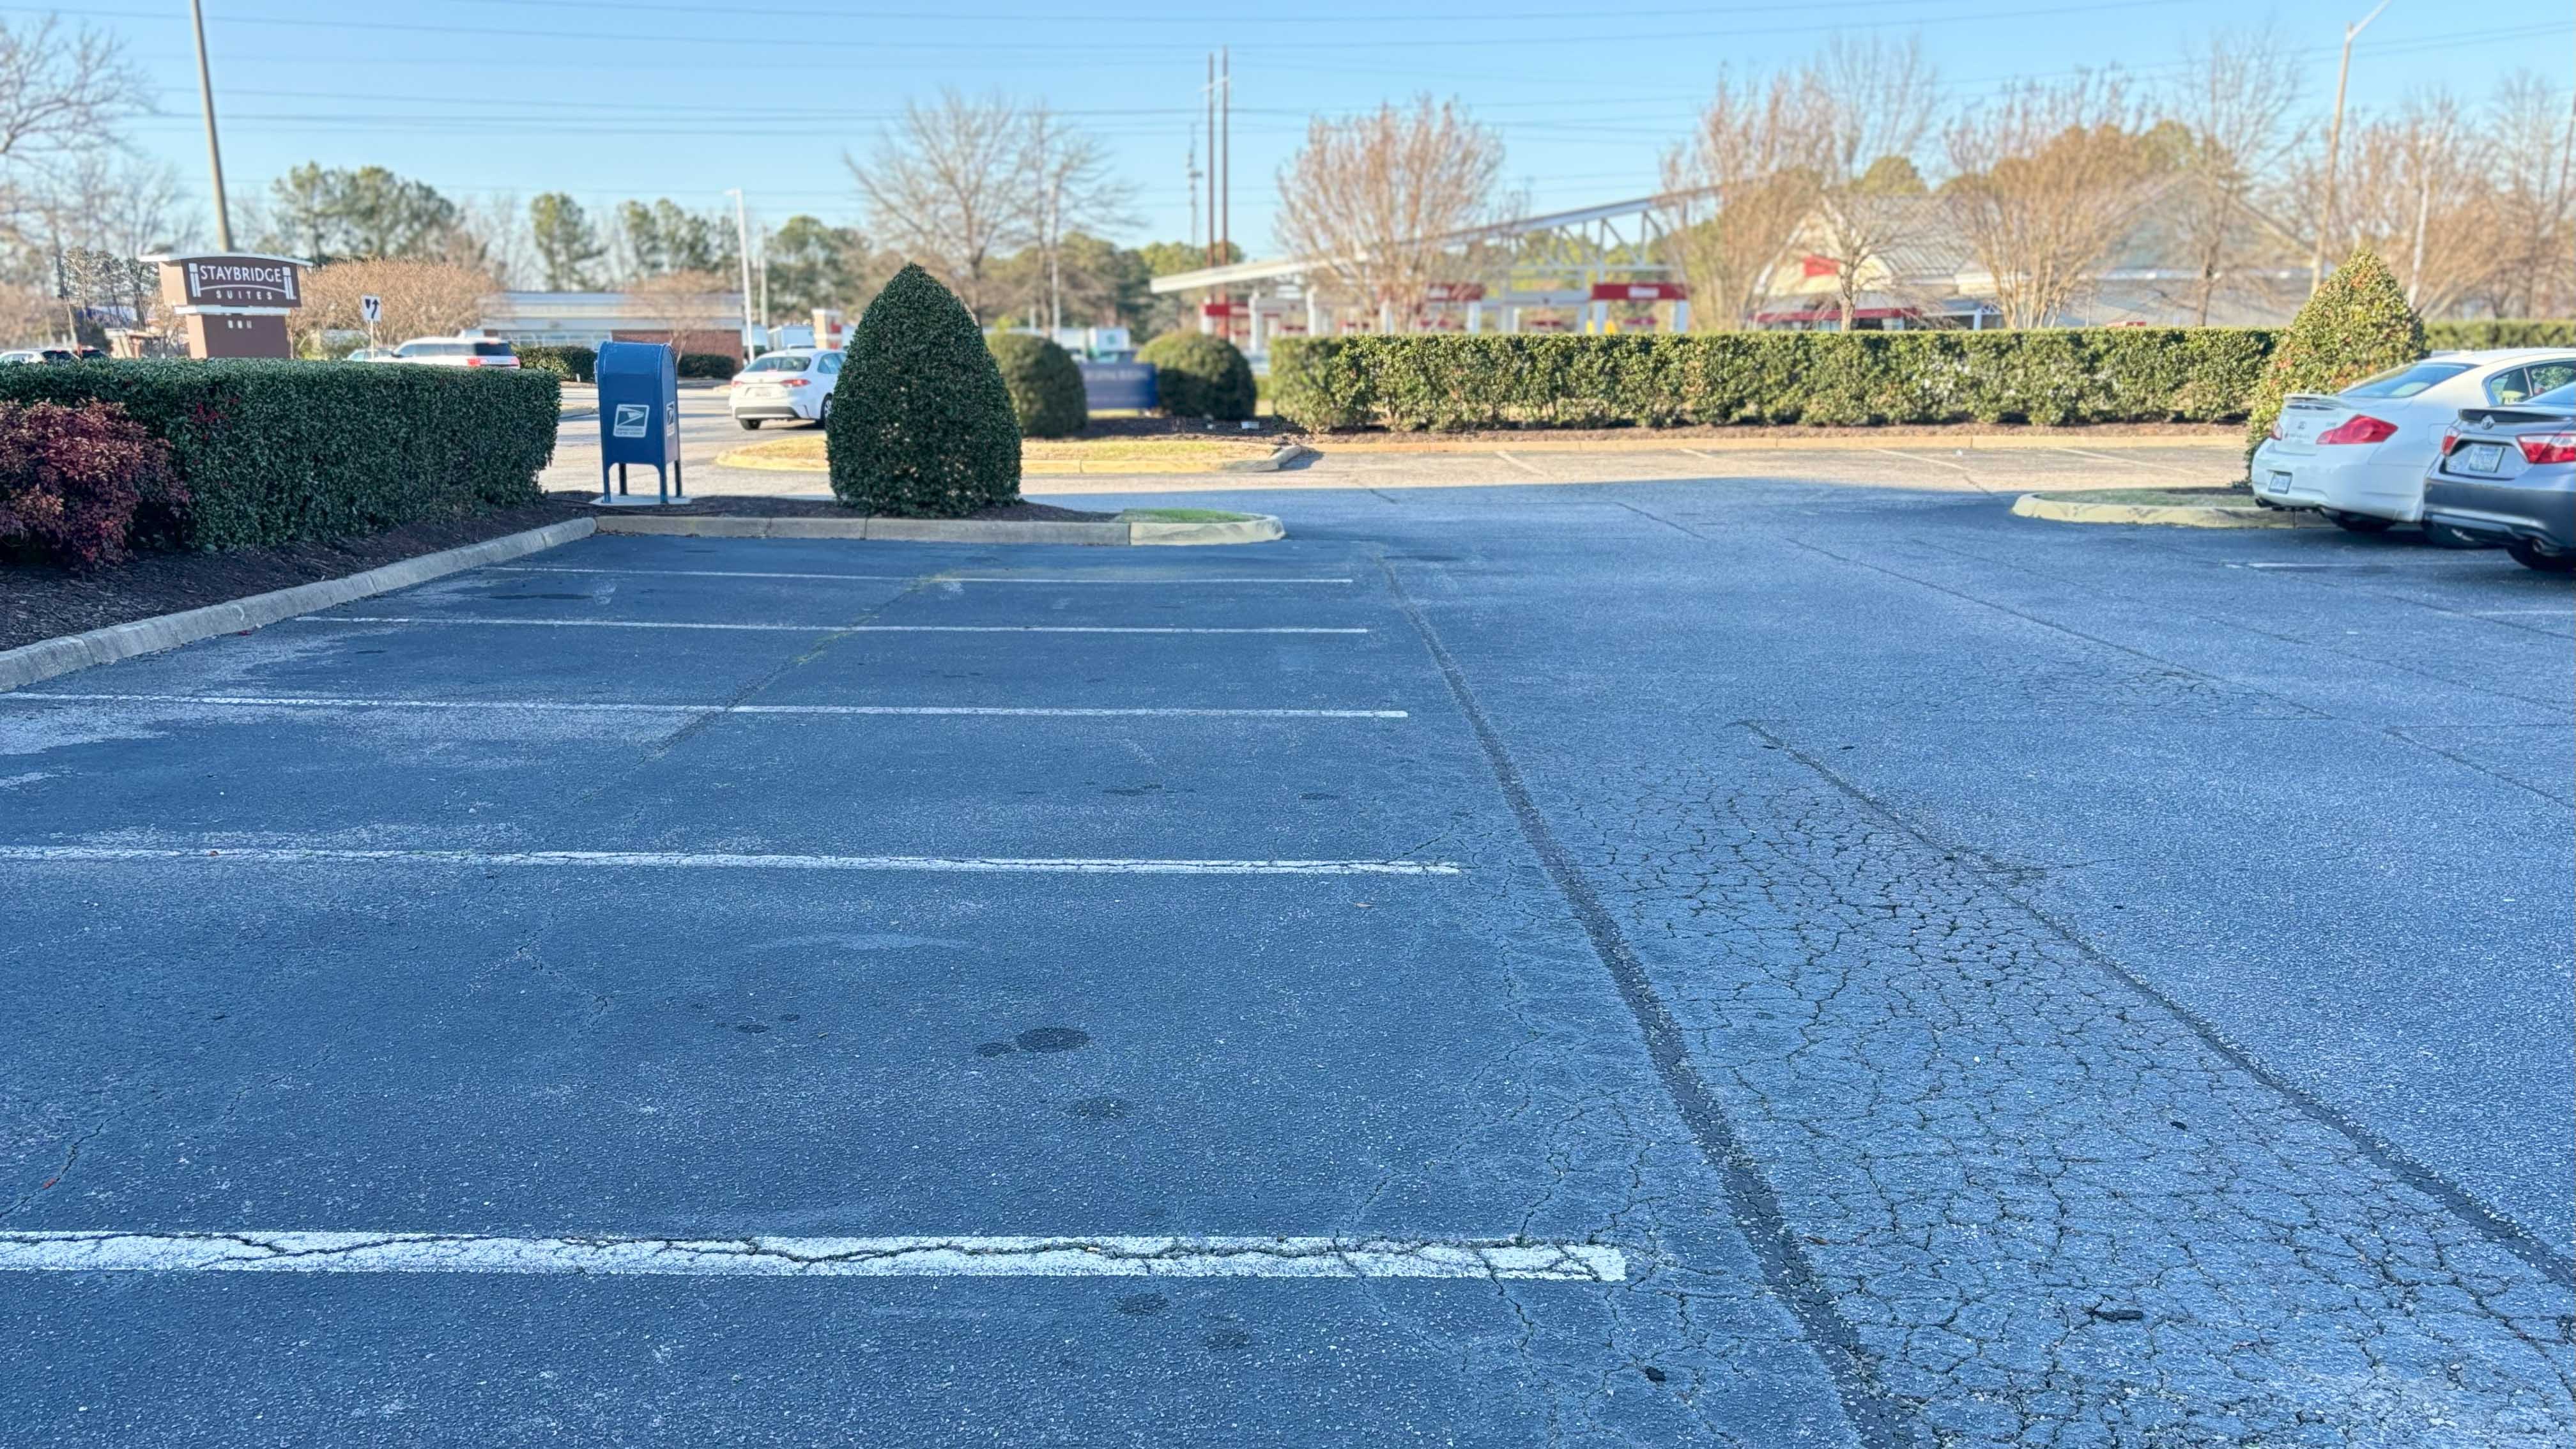 The parking lot at the Hampton Roads Planning District Commission in Chesapeake. (Photo by Katherine Hafner)